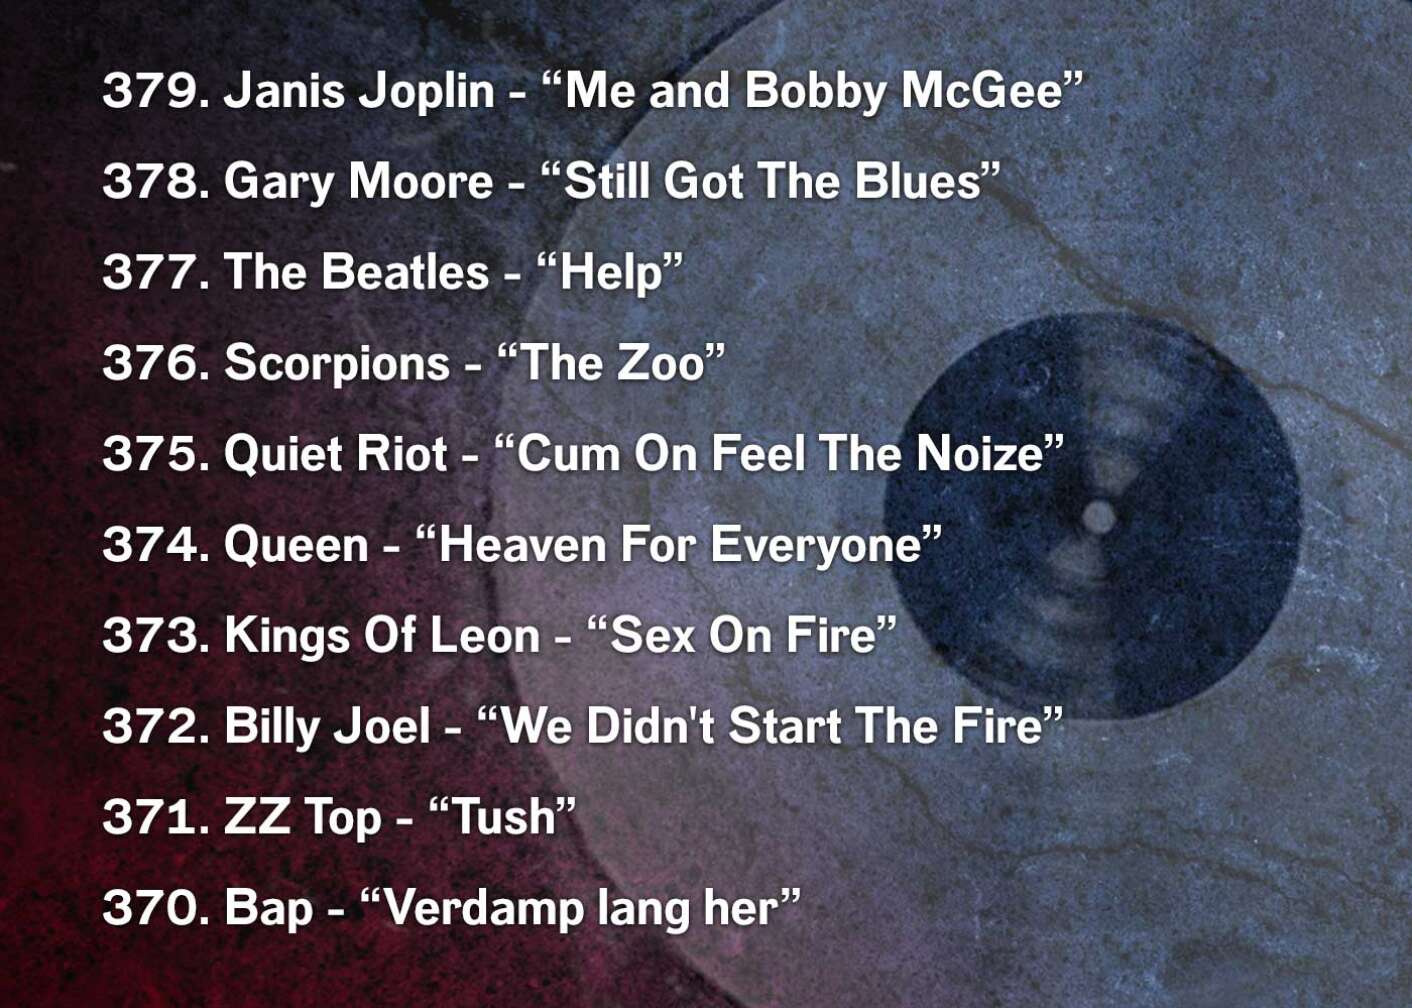 379. Janis Joplin - “Me and Bobby McGee” 378. Gary Moore - “Still Got The Blues” 377. The Beatles - “Help” 376. Scorpions - “The Zoo” 375. Quiet Riot - “Cum On Feel The Noize” 374. Queen - “Heaven For Everyone” 373. Kings Of Leon - “Sex On Fire” 372. Billy Joel - “We Didn't Start The Fire” 371. ZZ Top - “Tush” 370. Bap - “Verdamp lang her”